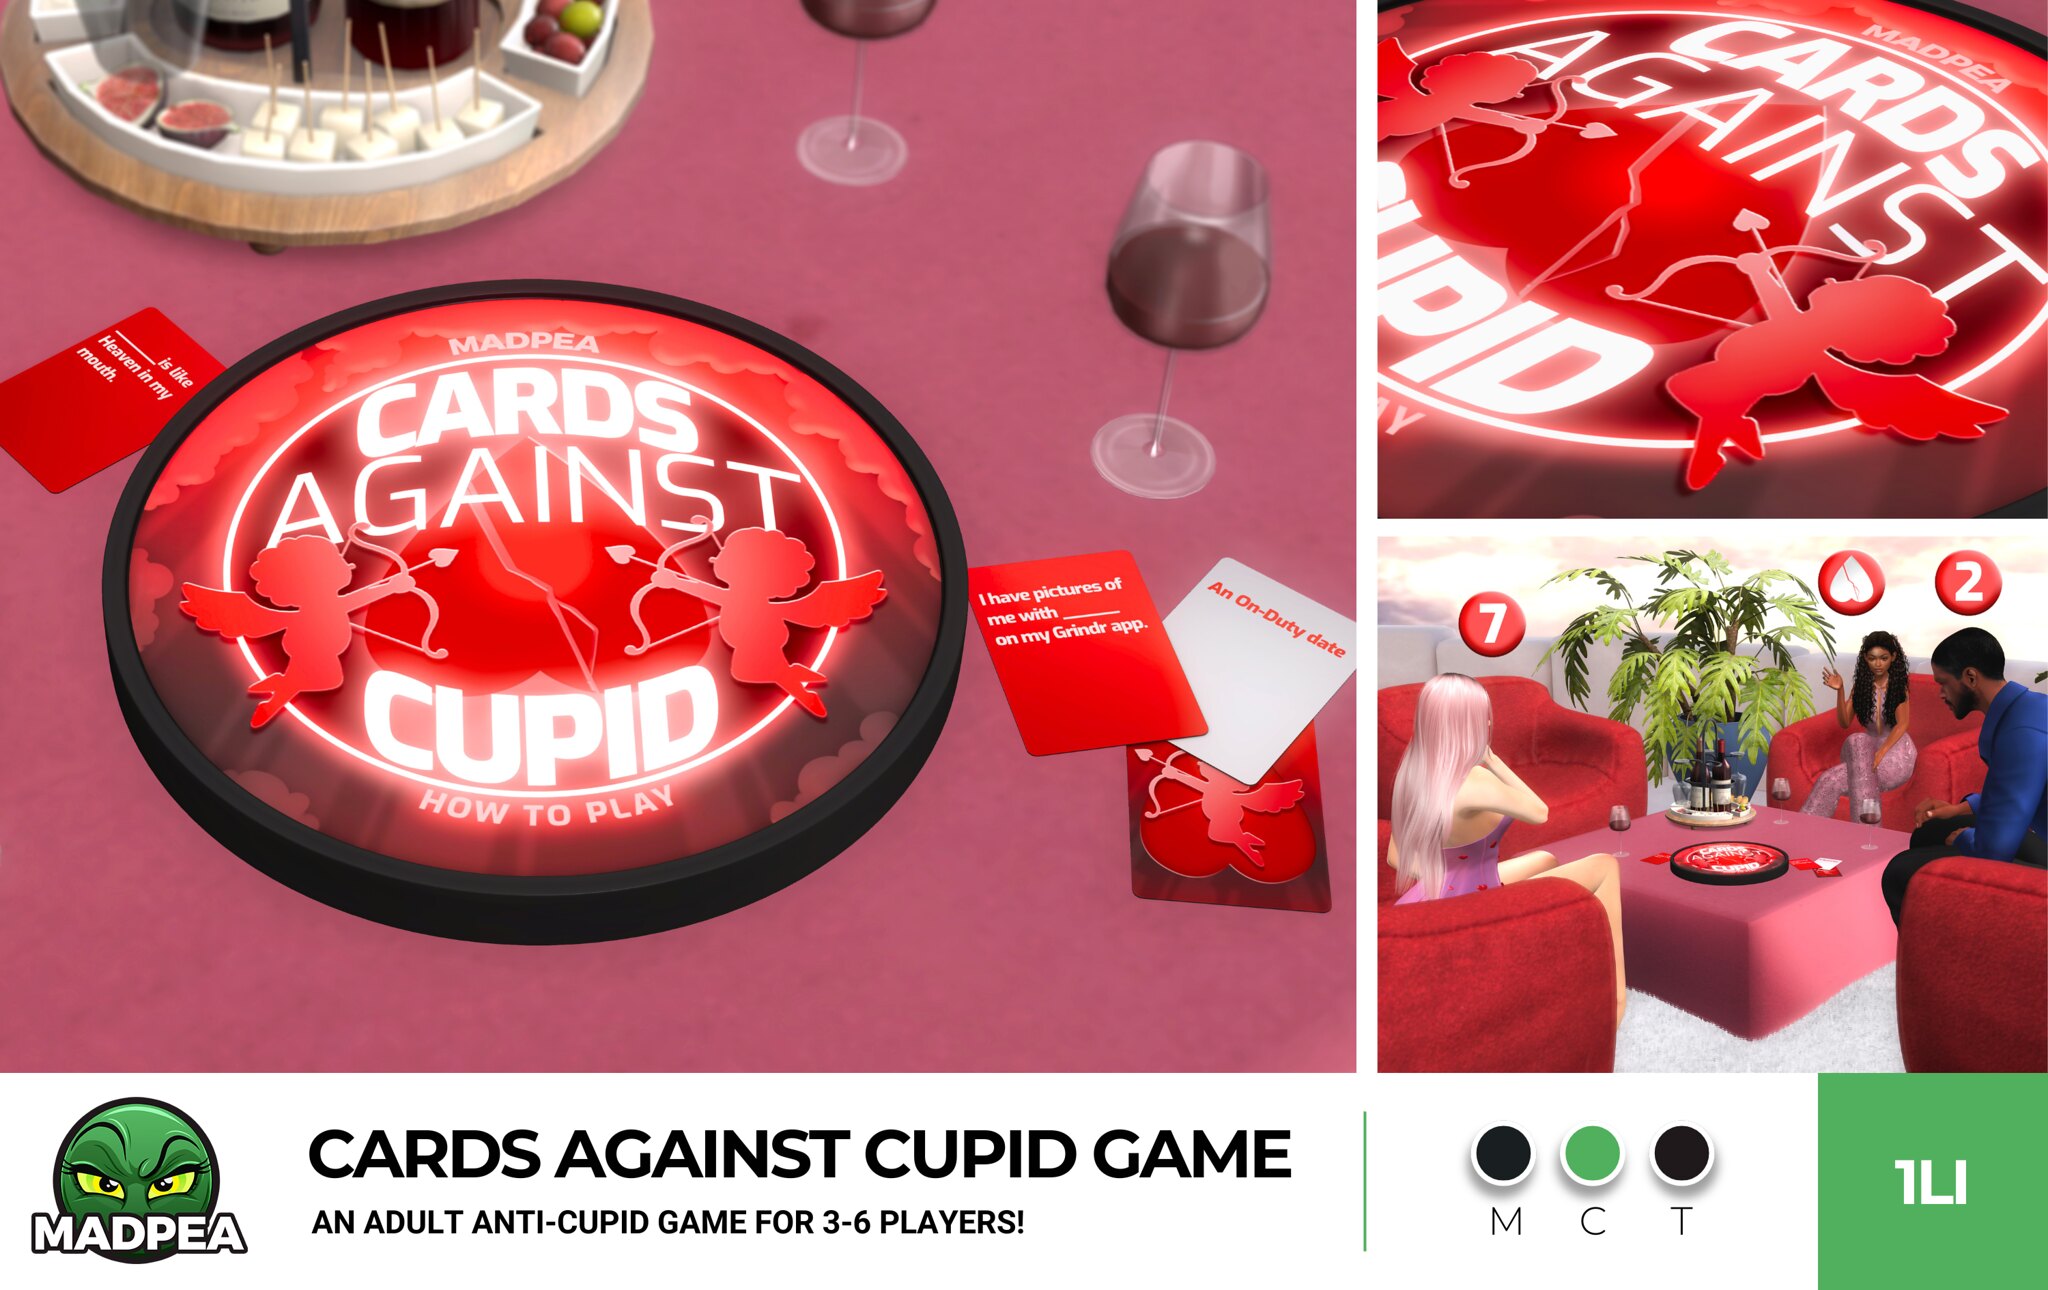 MadPea – ‘Cards Against Cupid’ Game